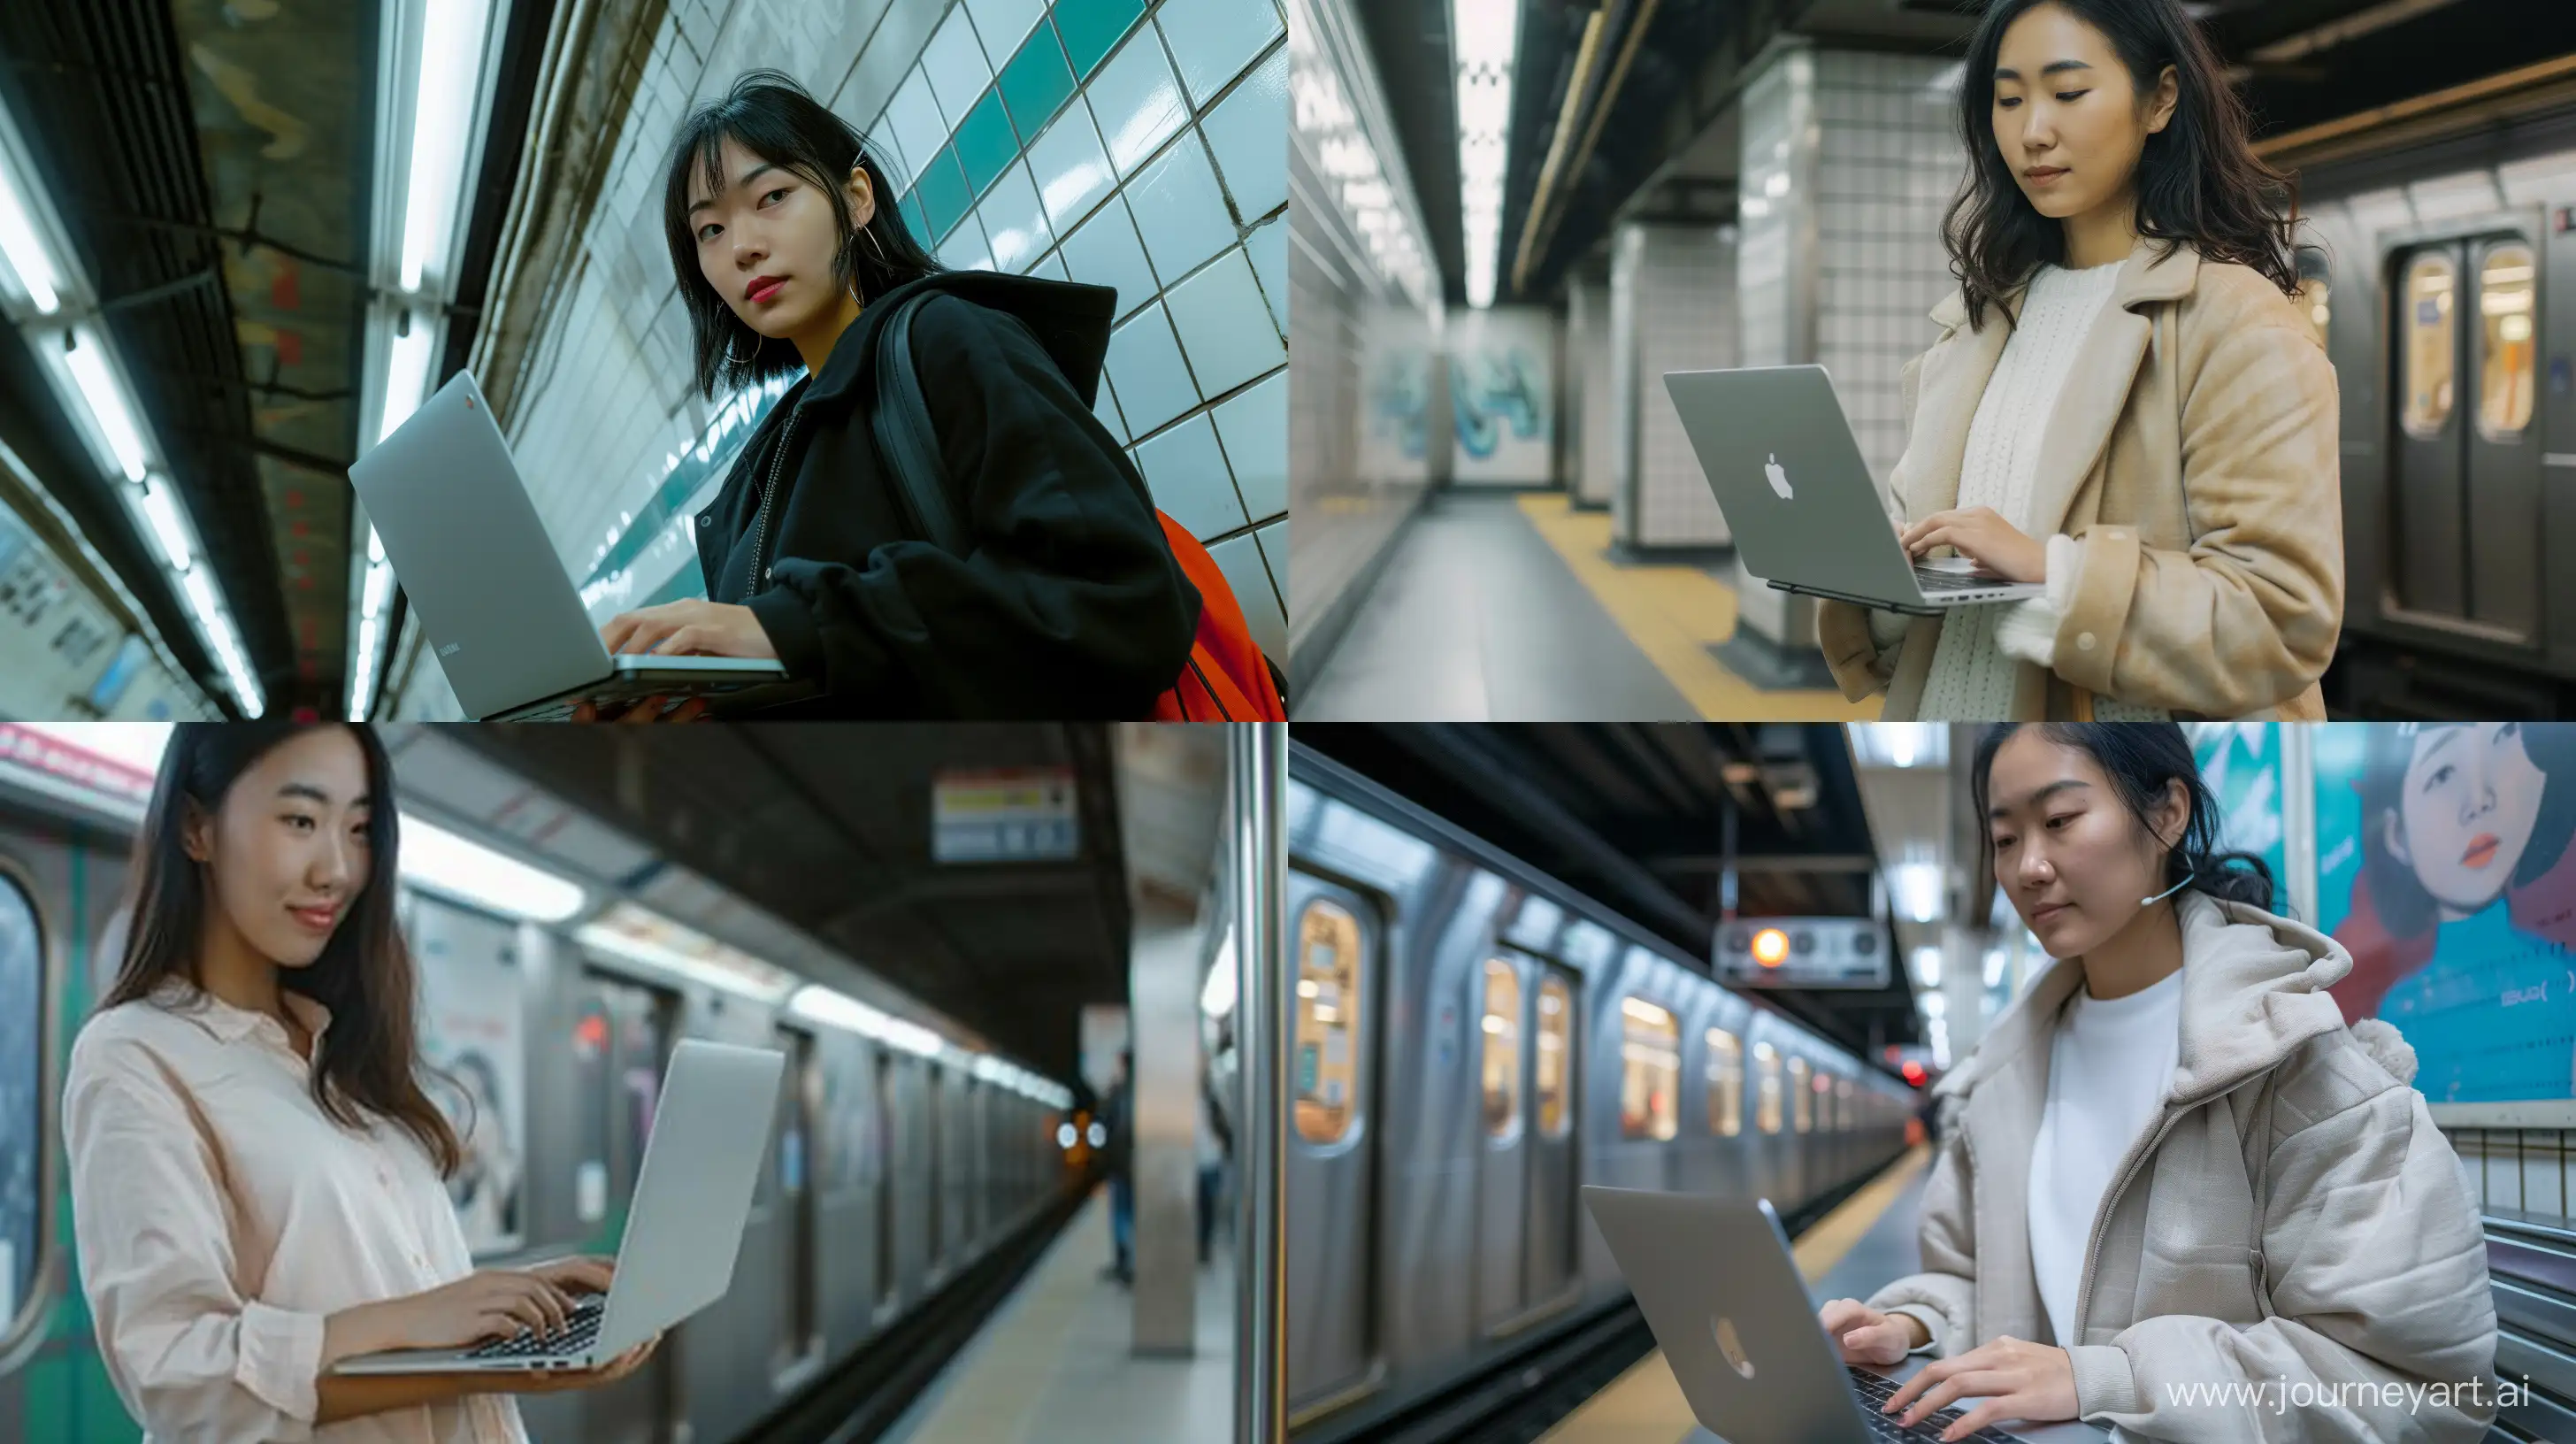 90s-Style-Asian-Woman-Hacker-with-Laptop-in-Subway